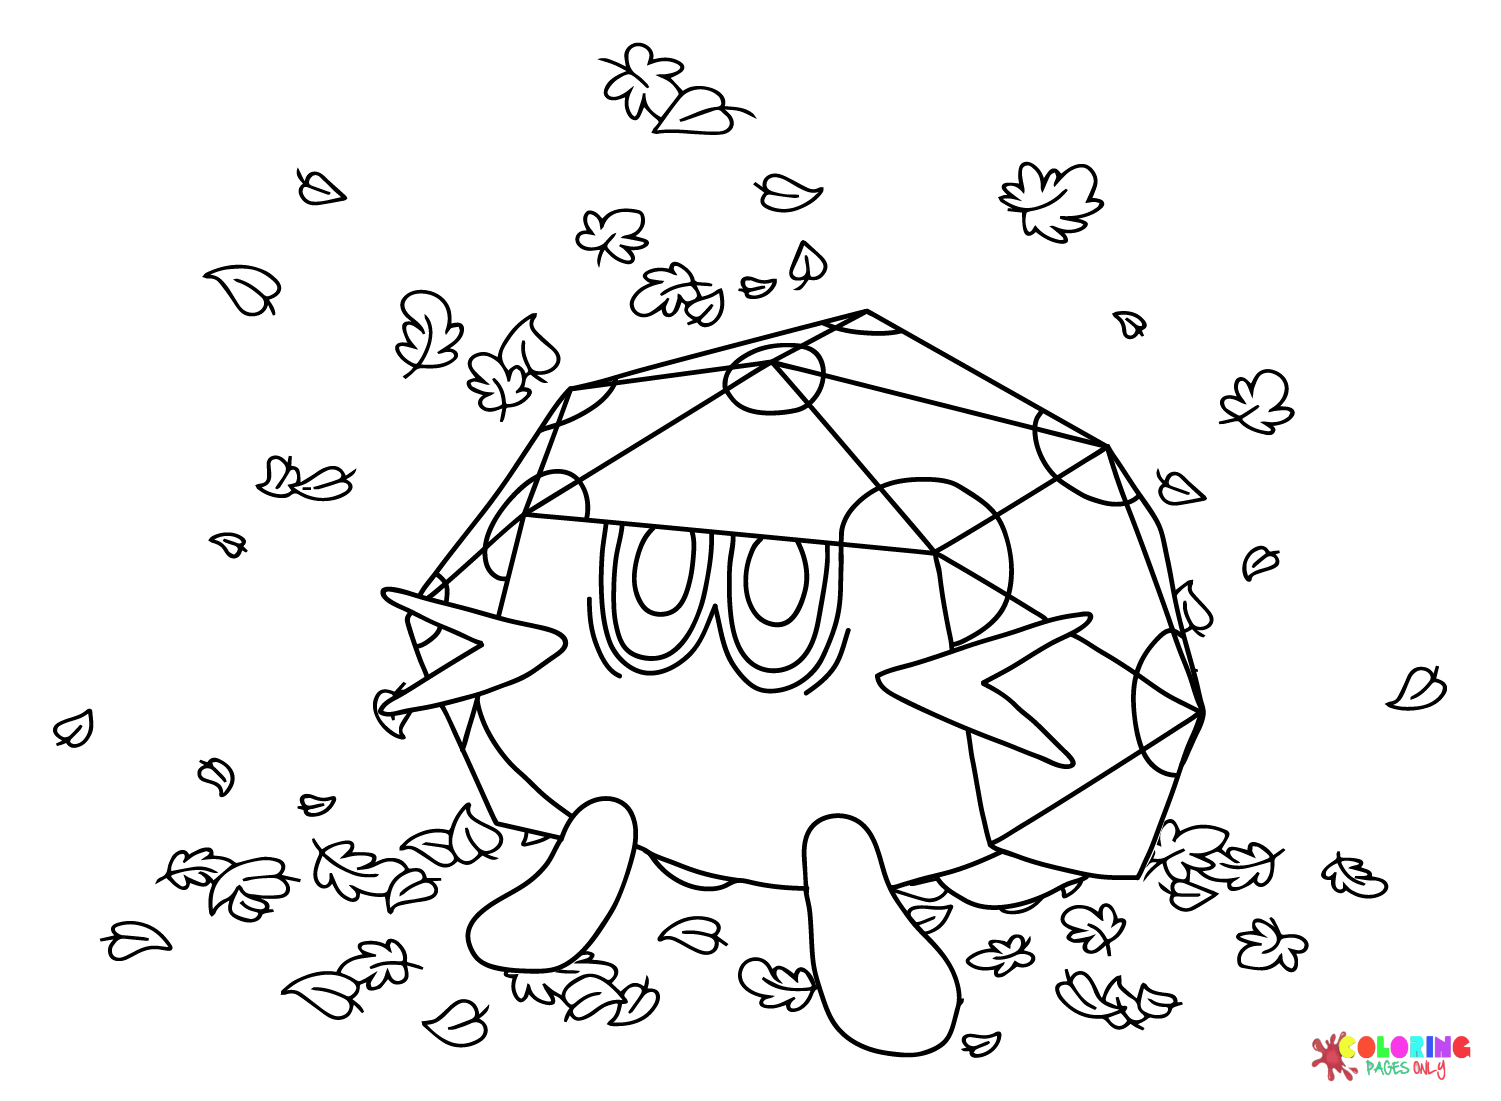 The Pokemon Dottler Coloring Pages - Free Printable Coloring Pages